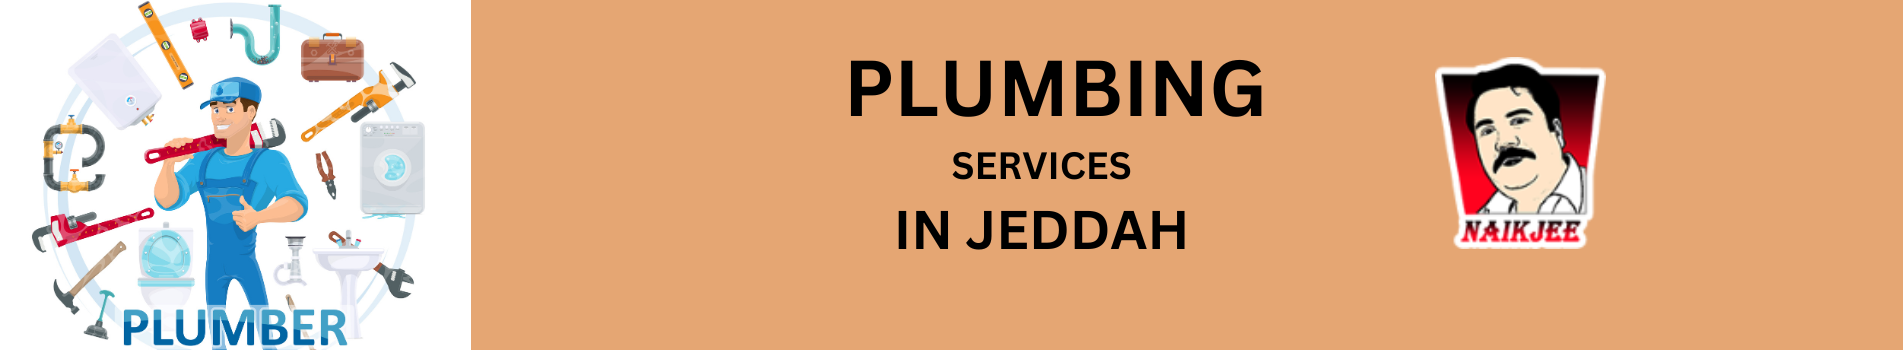 The Best Plumbing Services in Jeddah and Saudi Arabia - Naikjee